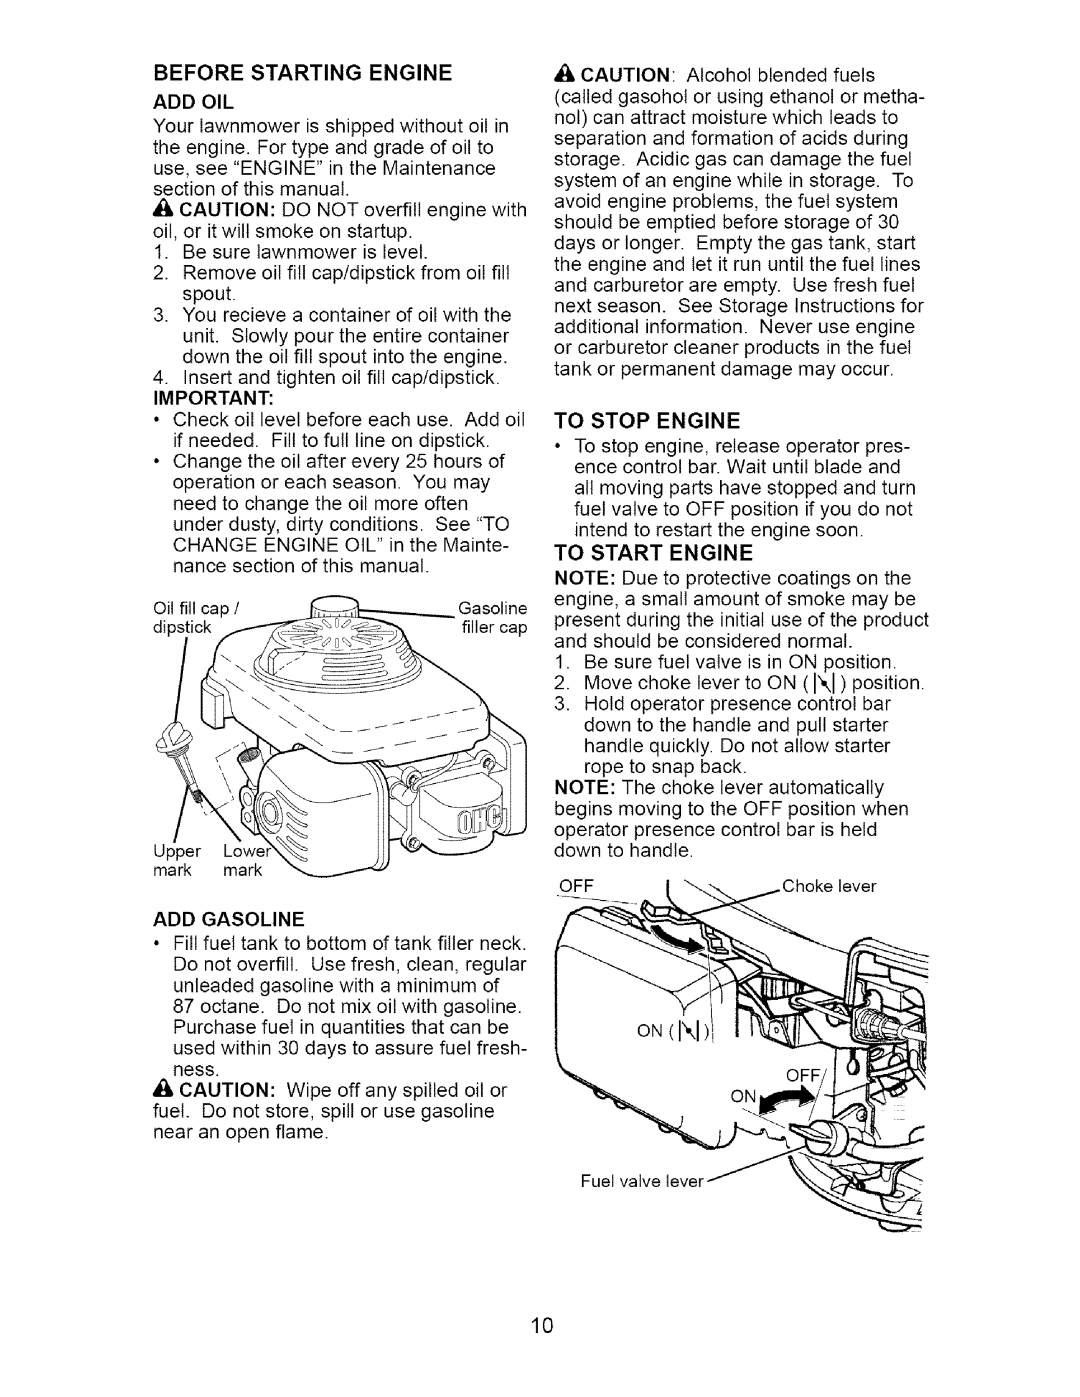 Craftsman 917.37172 owner manual Before Starting Engine, Add Oil, To Stop Engine 